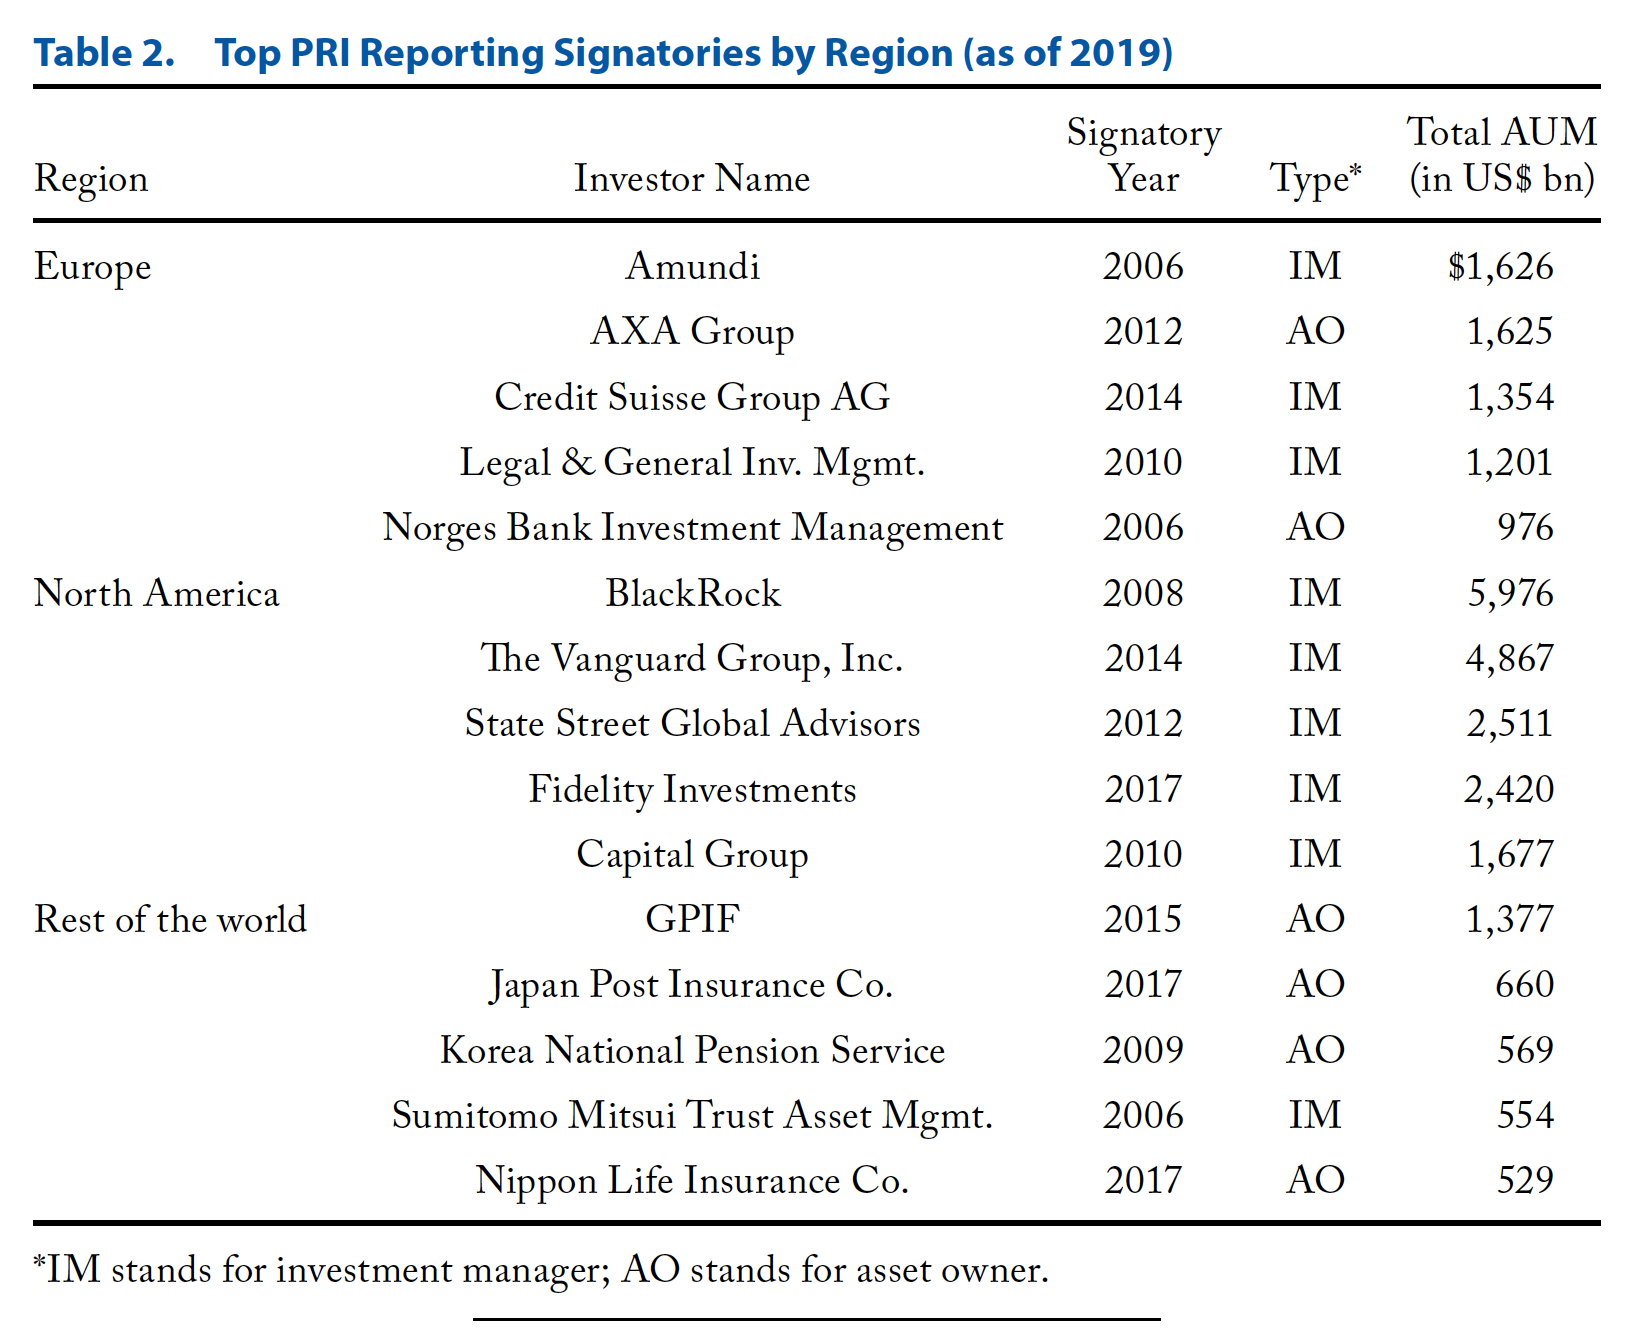 These are large investment firms and asset owners that say they will follow certain ESG guidelines. Source: CFA Institute (2020)